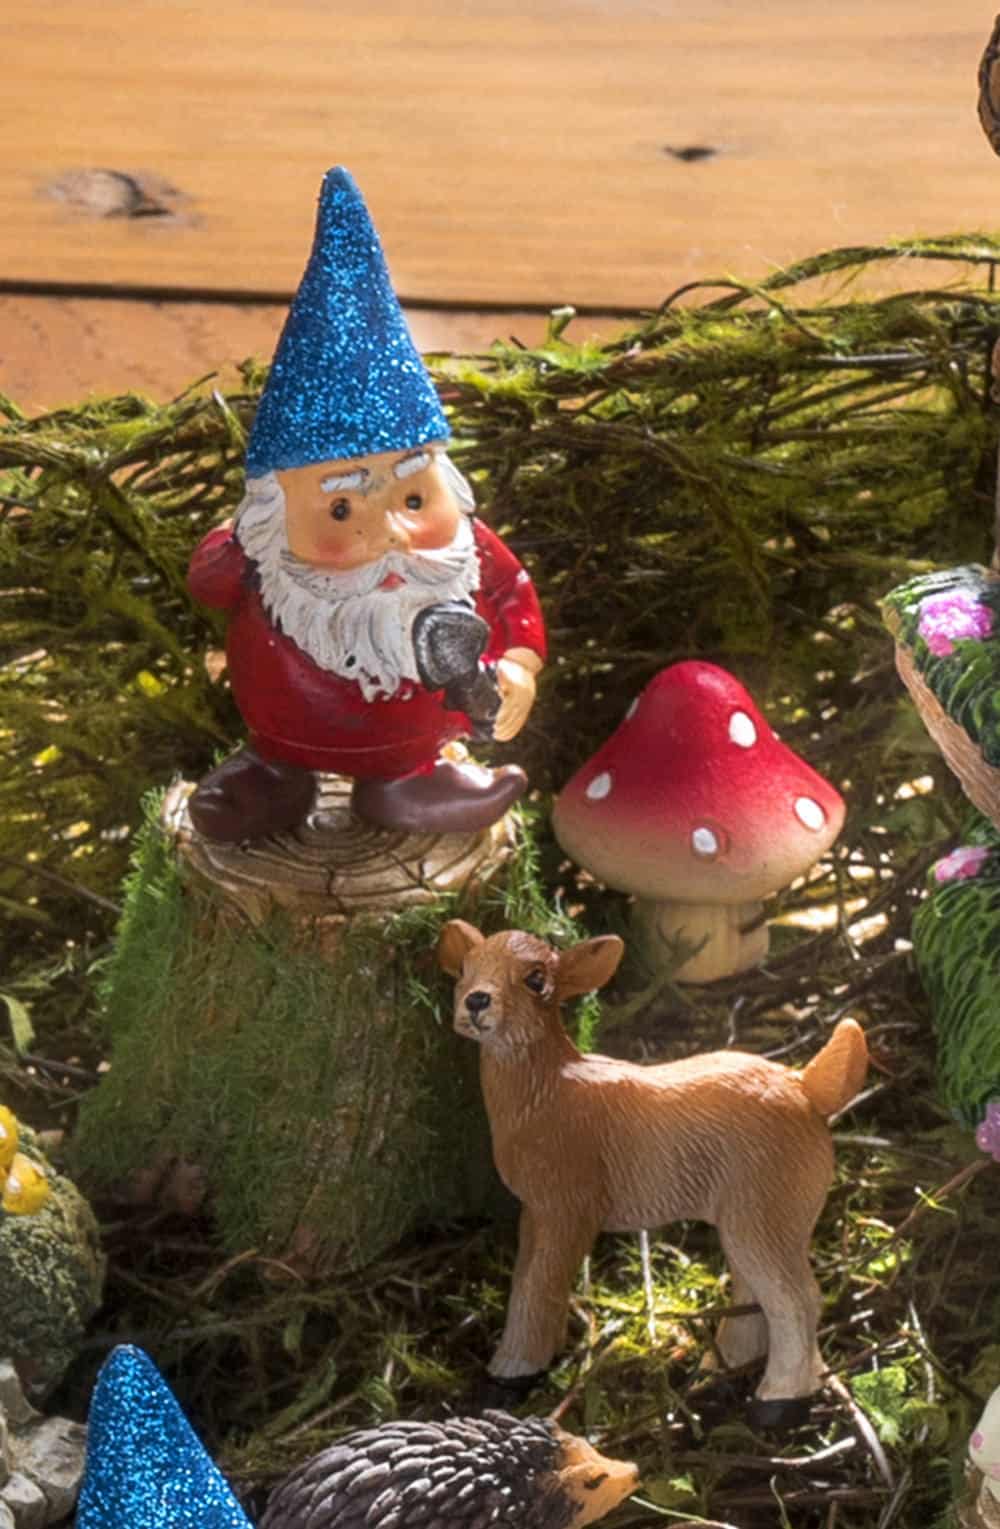 Create a desktop fairy garden with gnomes, woodland animals, and other forest accessories. Customize with glitter and Mod Melts!